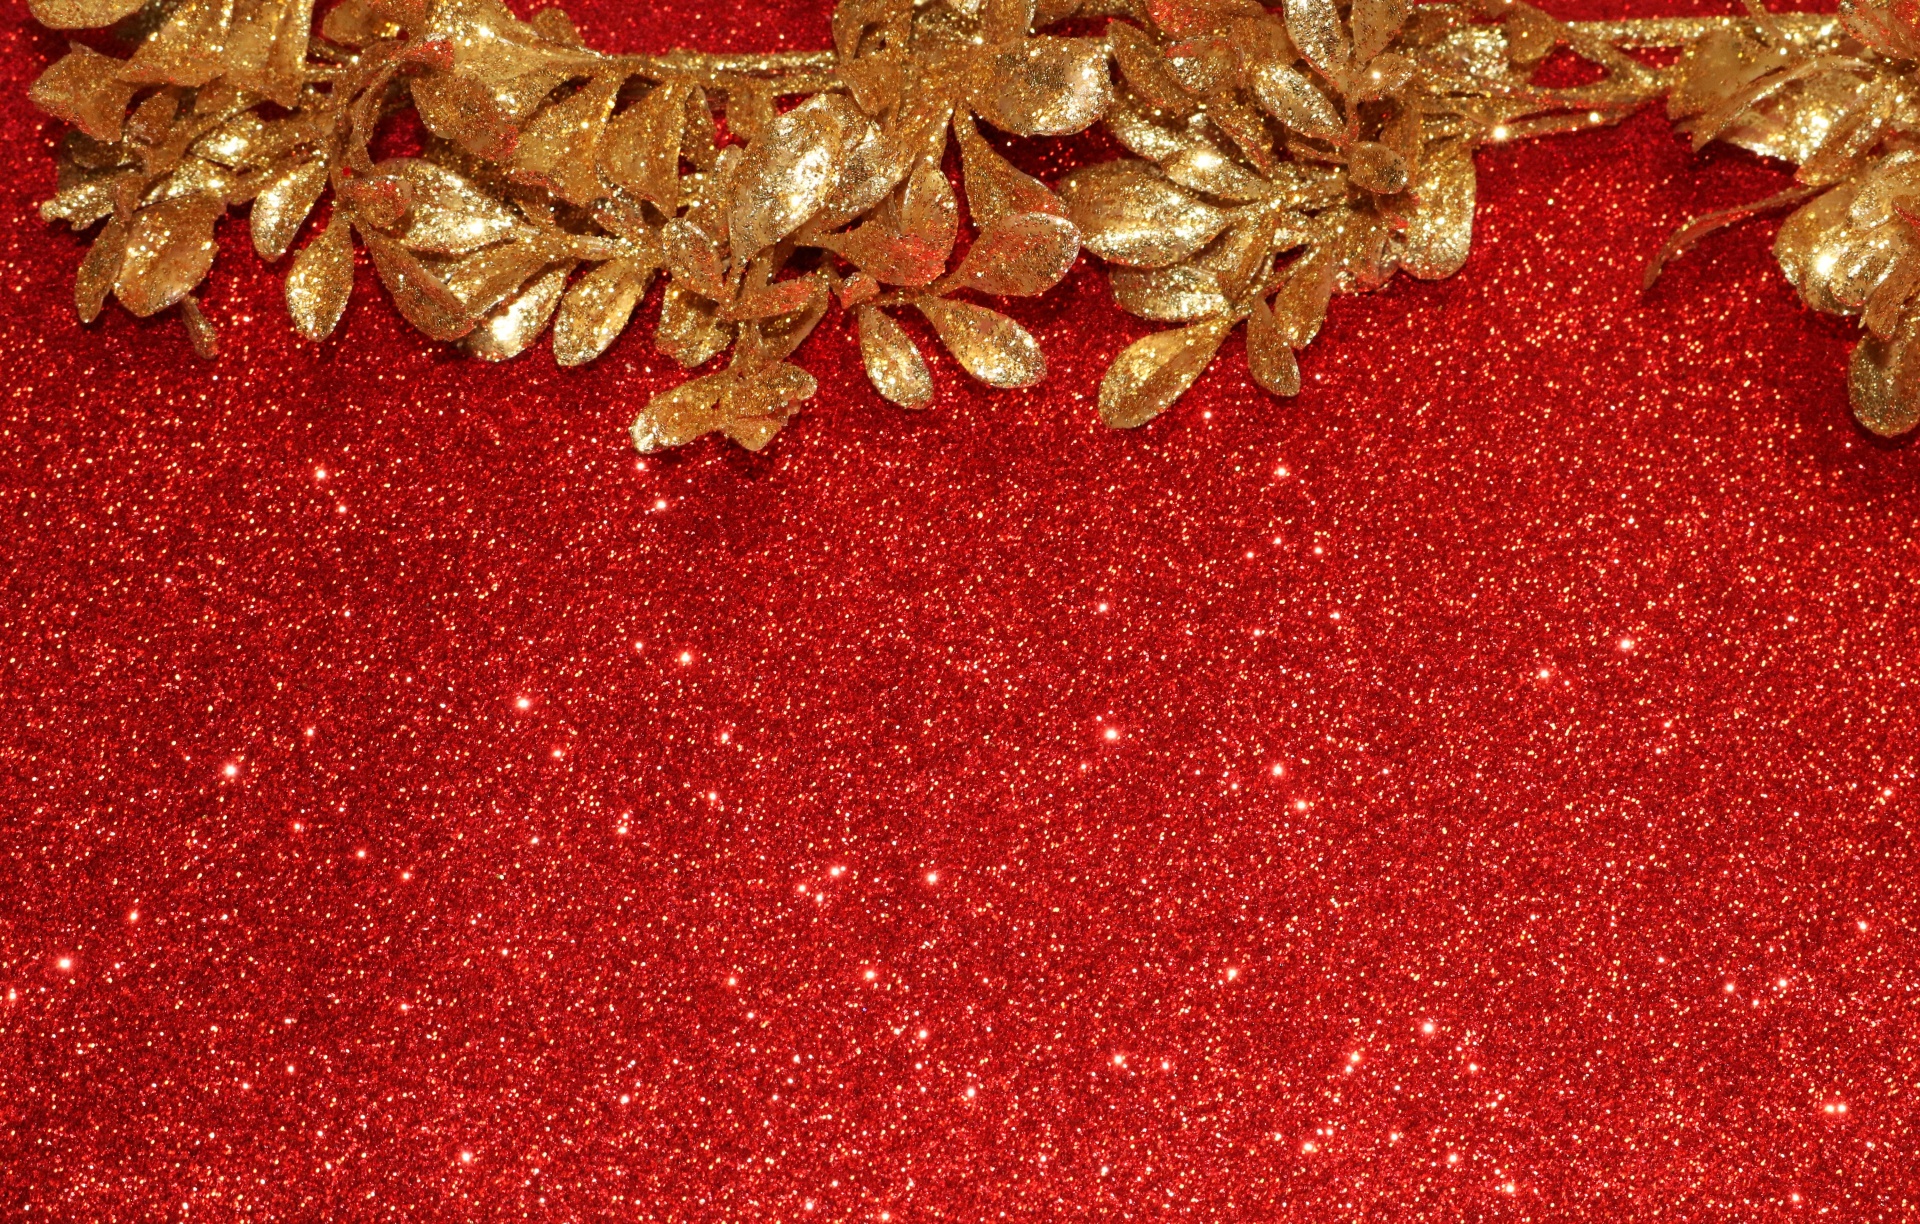 A Christmas background of a stem of gold glittery leaves on a red glitter background with room for text.